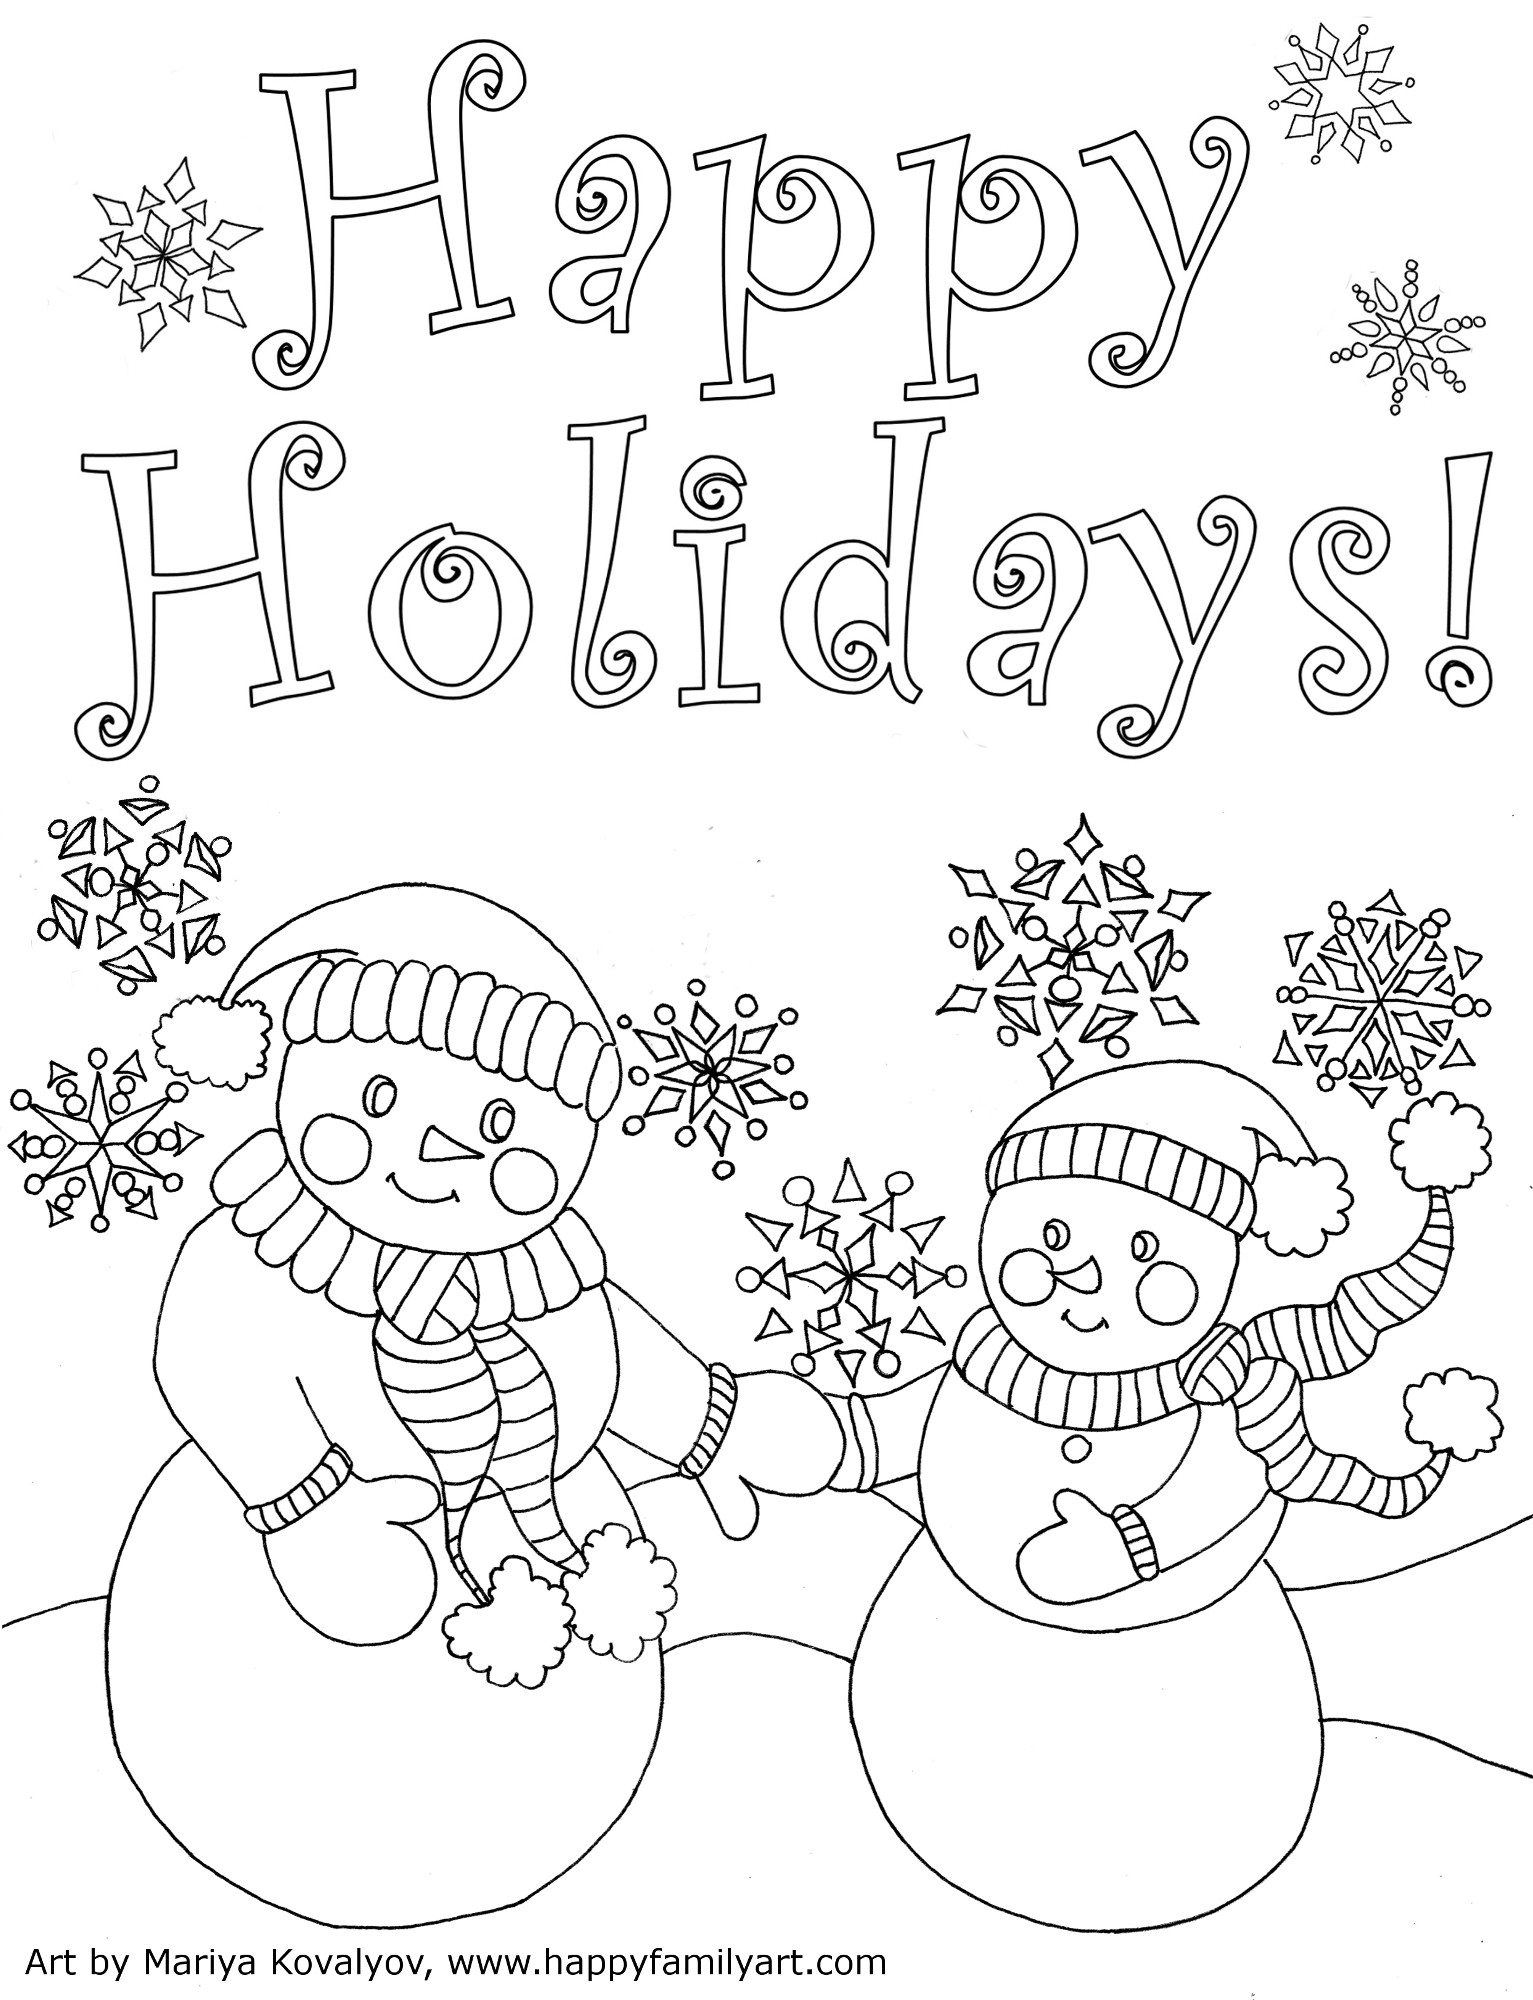 Holiday Coloring Pages Printable
 Happy Family Art original and fun coloring pages